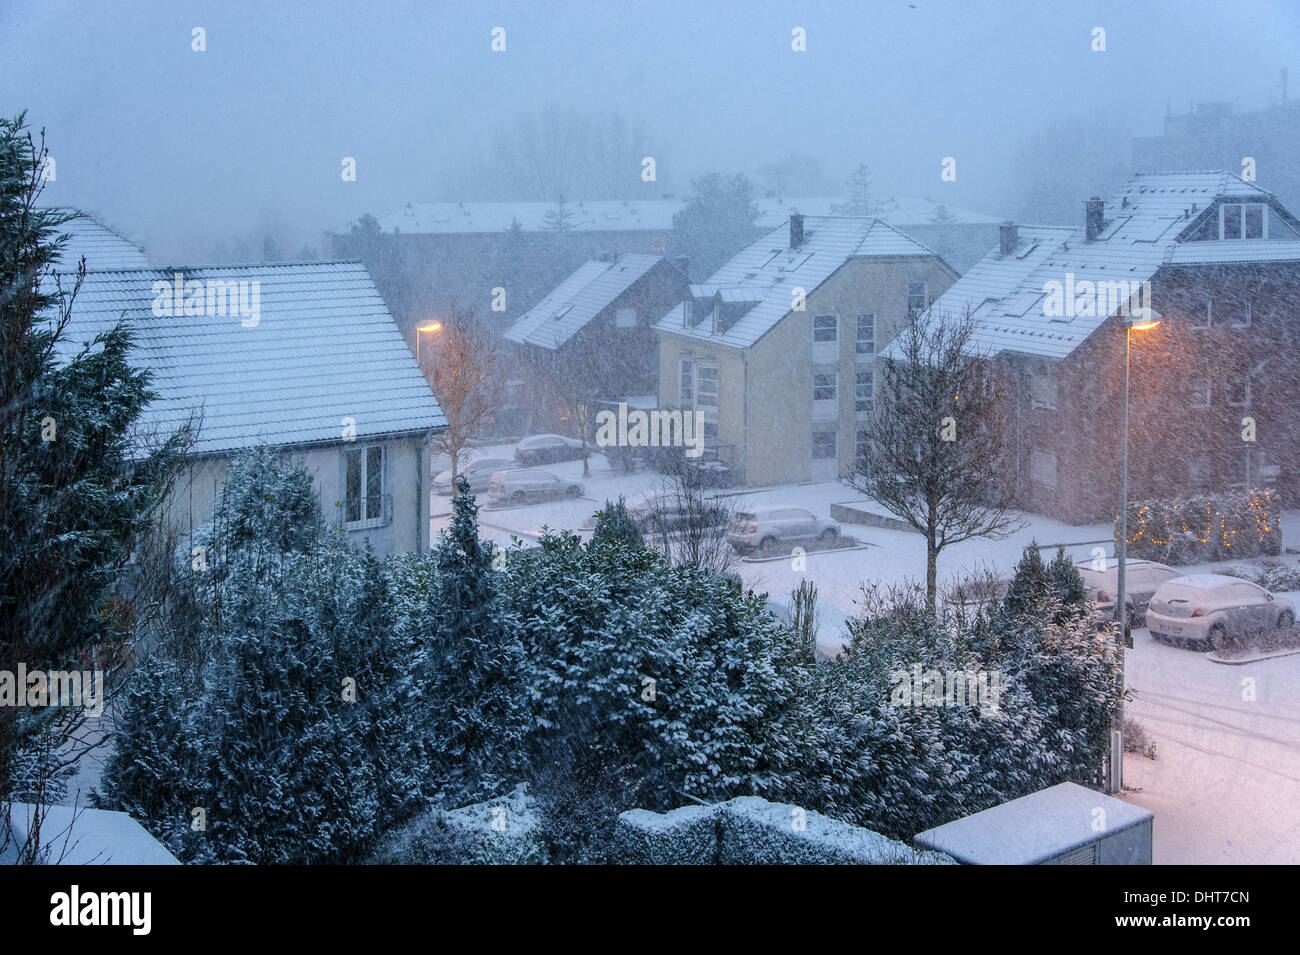 Residential area at dawn when it is snowing Stock Photo